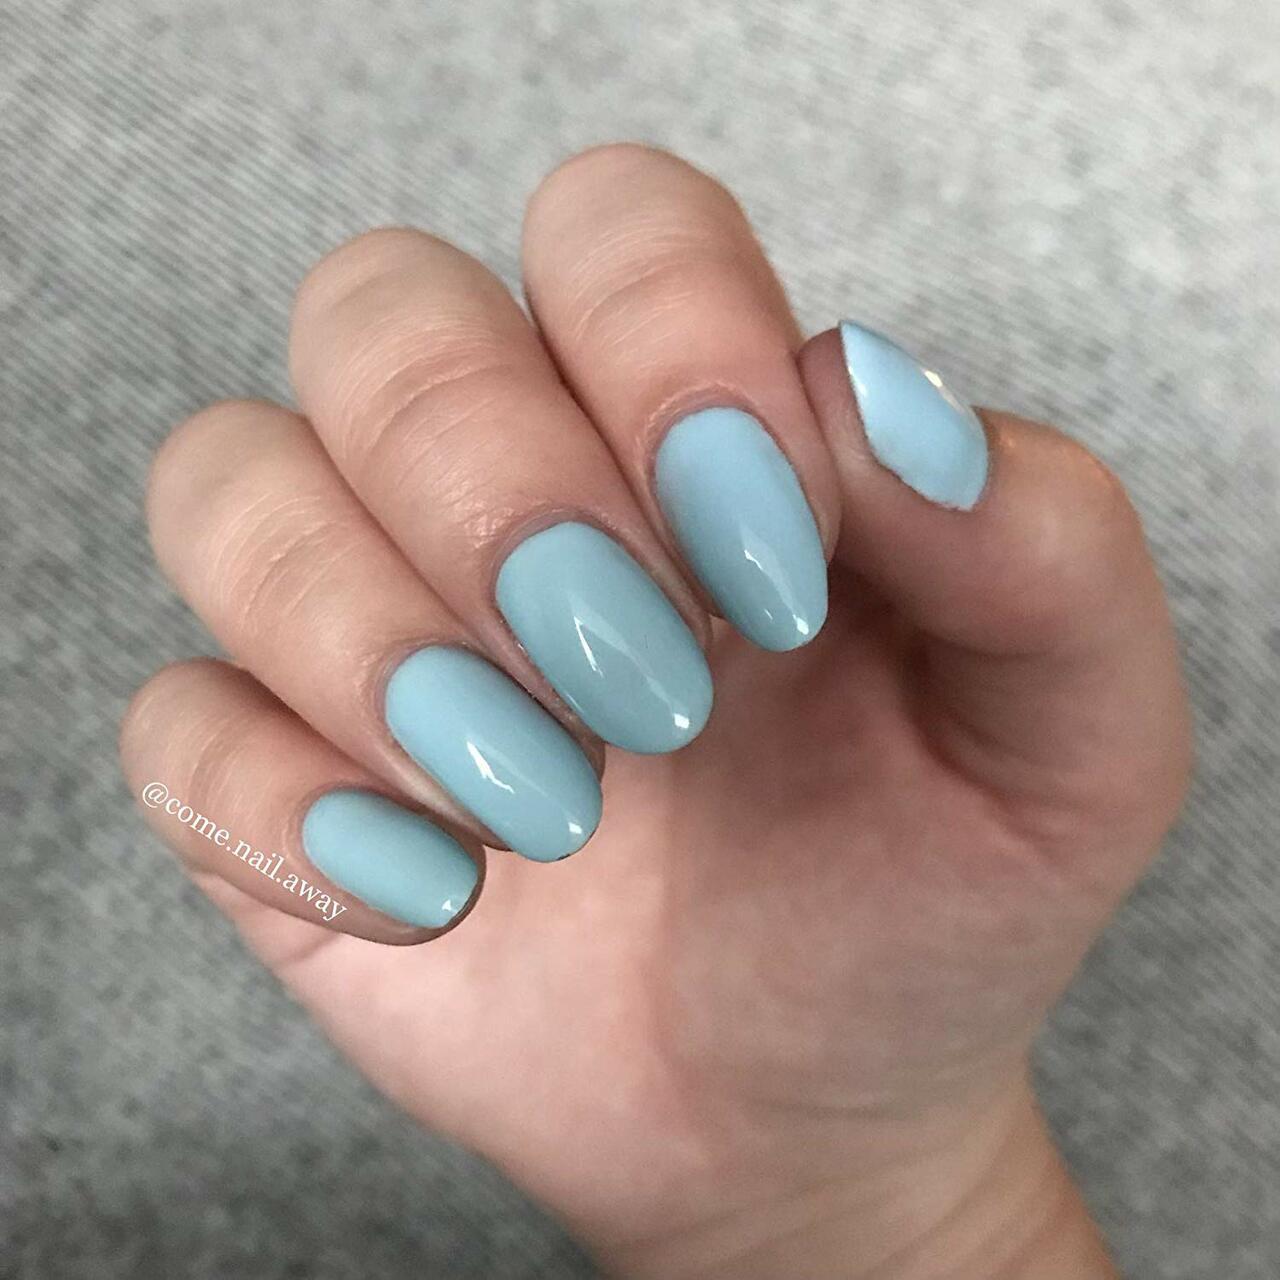 Press On Nails Nude And Baby Blue - Walmart.com